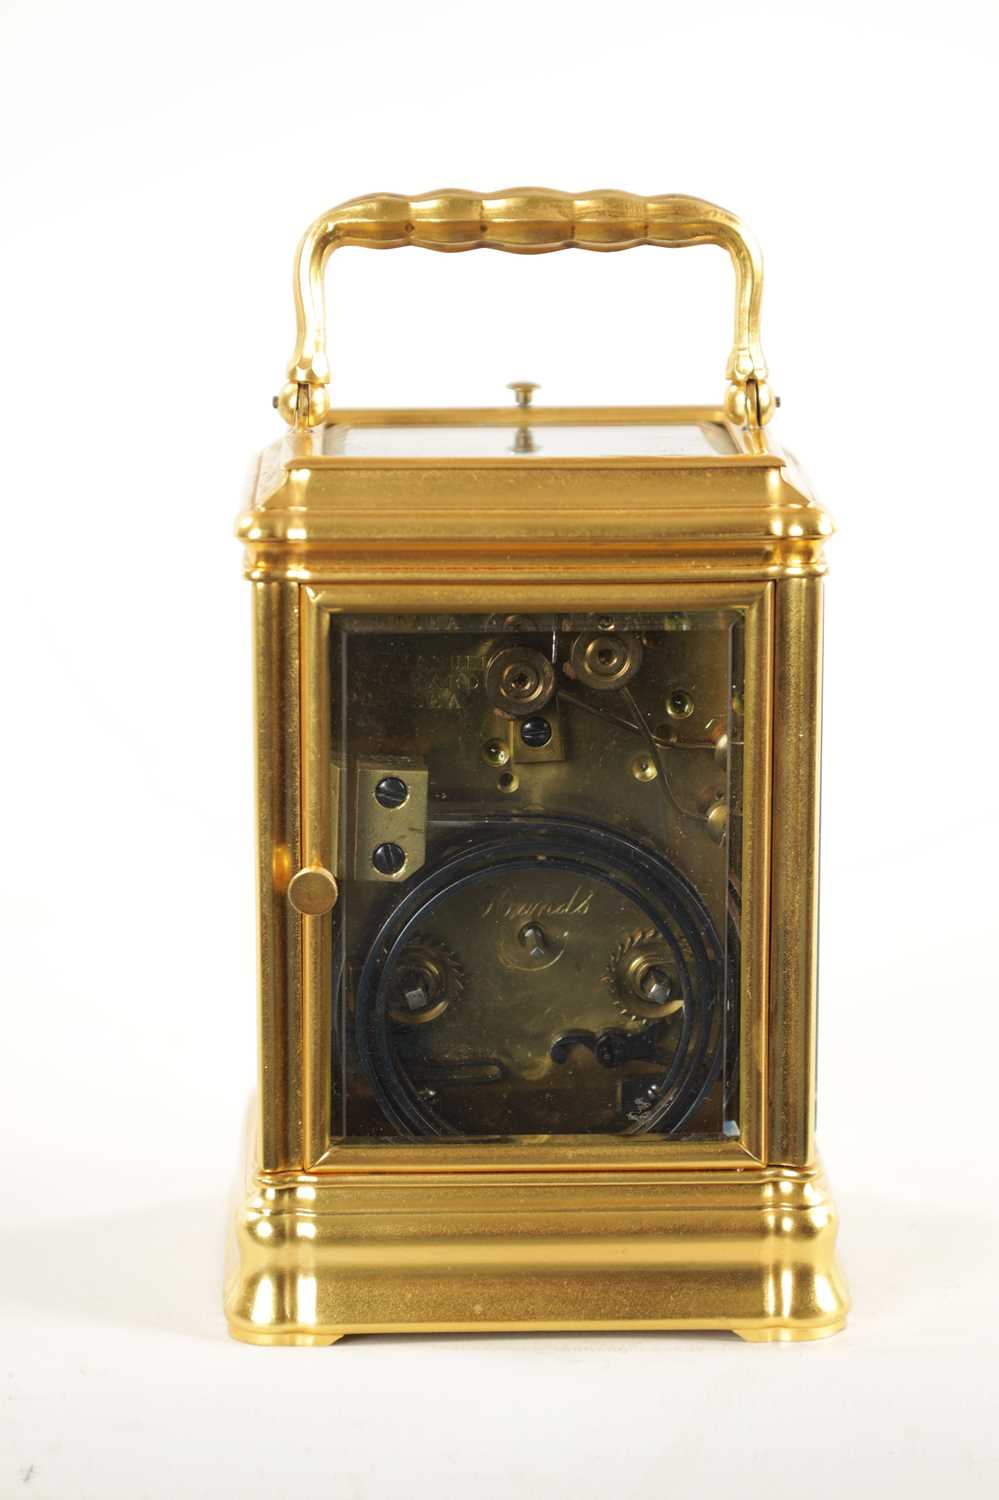 A LATE 19TH CENTURY FRENCH GORGE-CASED QUARTER CHIMING/REPEATING CARRIAGE CLOCK - Image 5 of 9